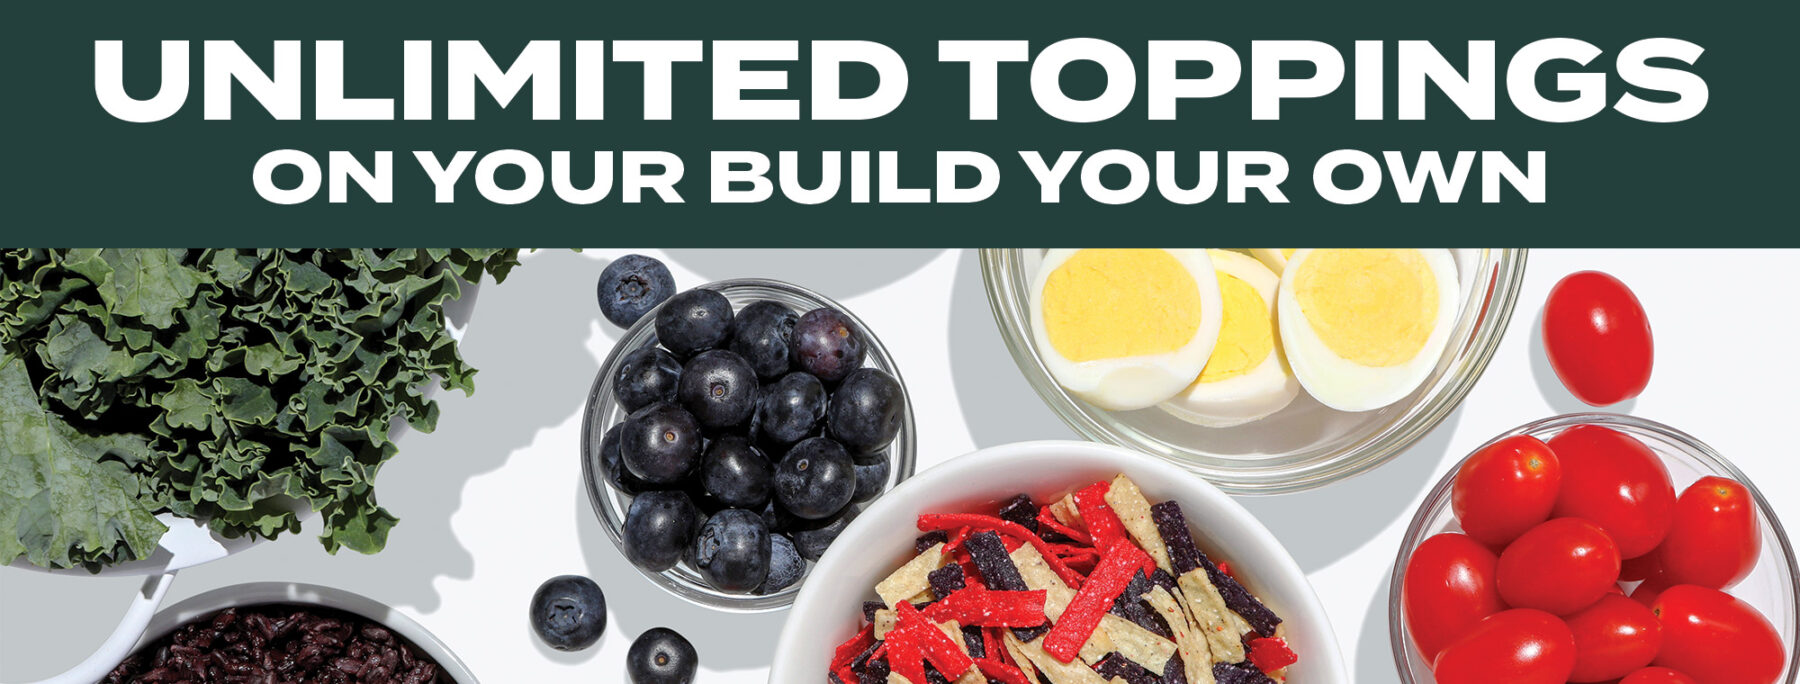 Unlimited Toppings on your Build Your Own